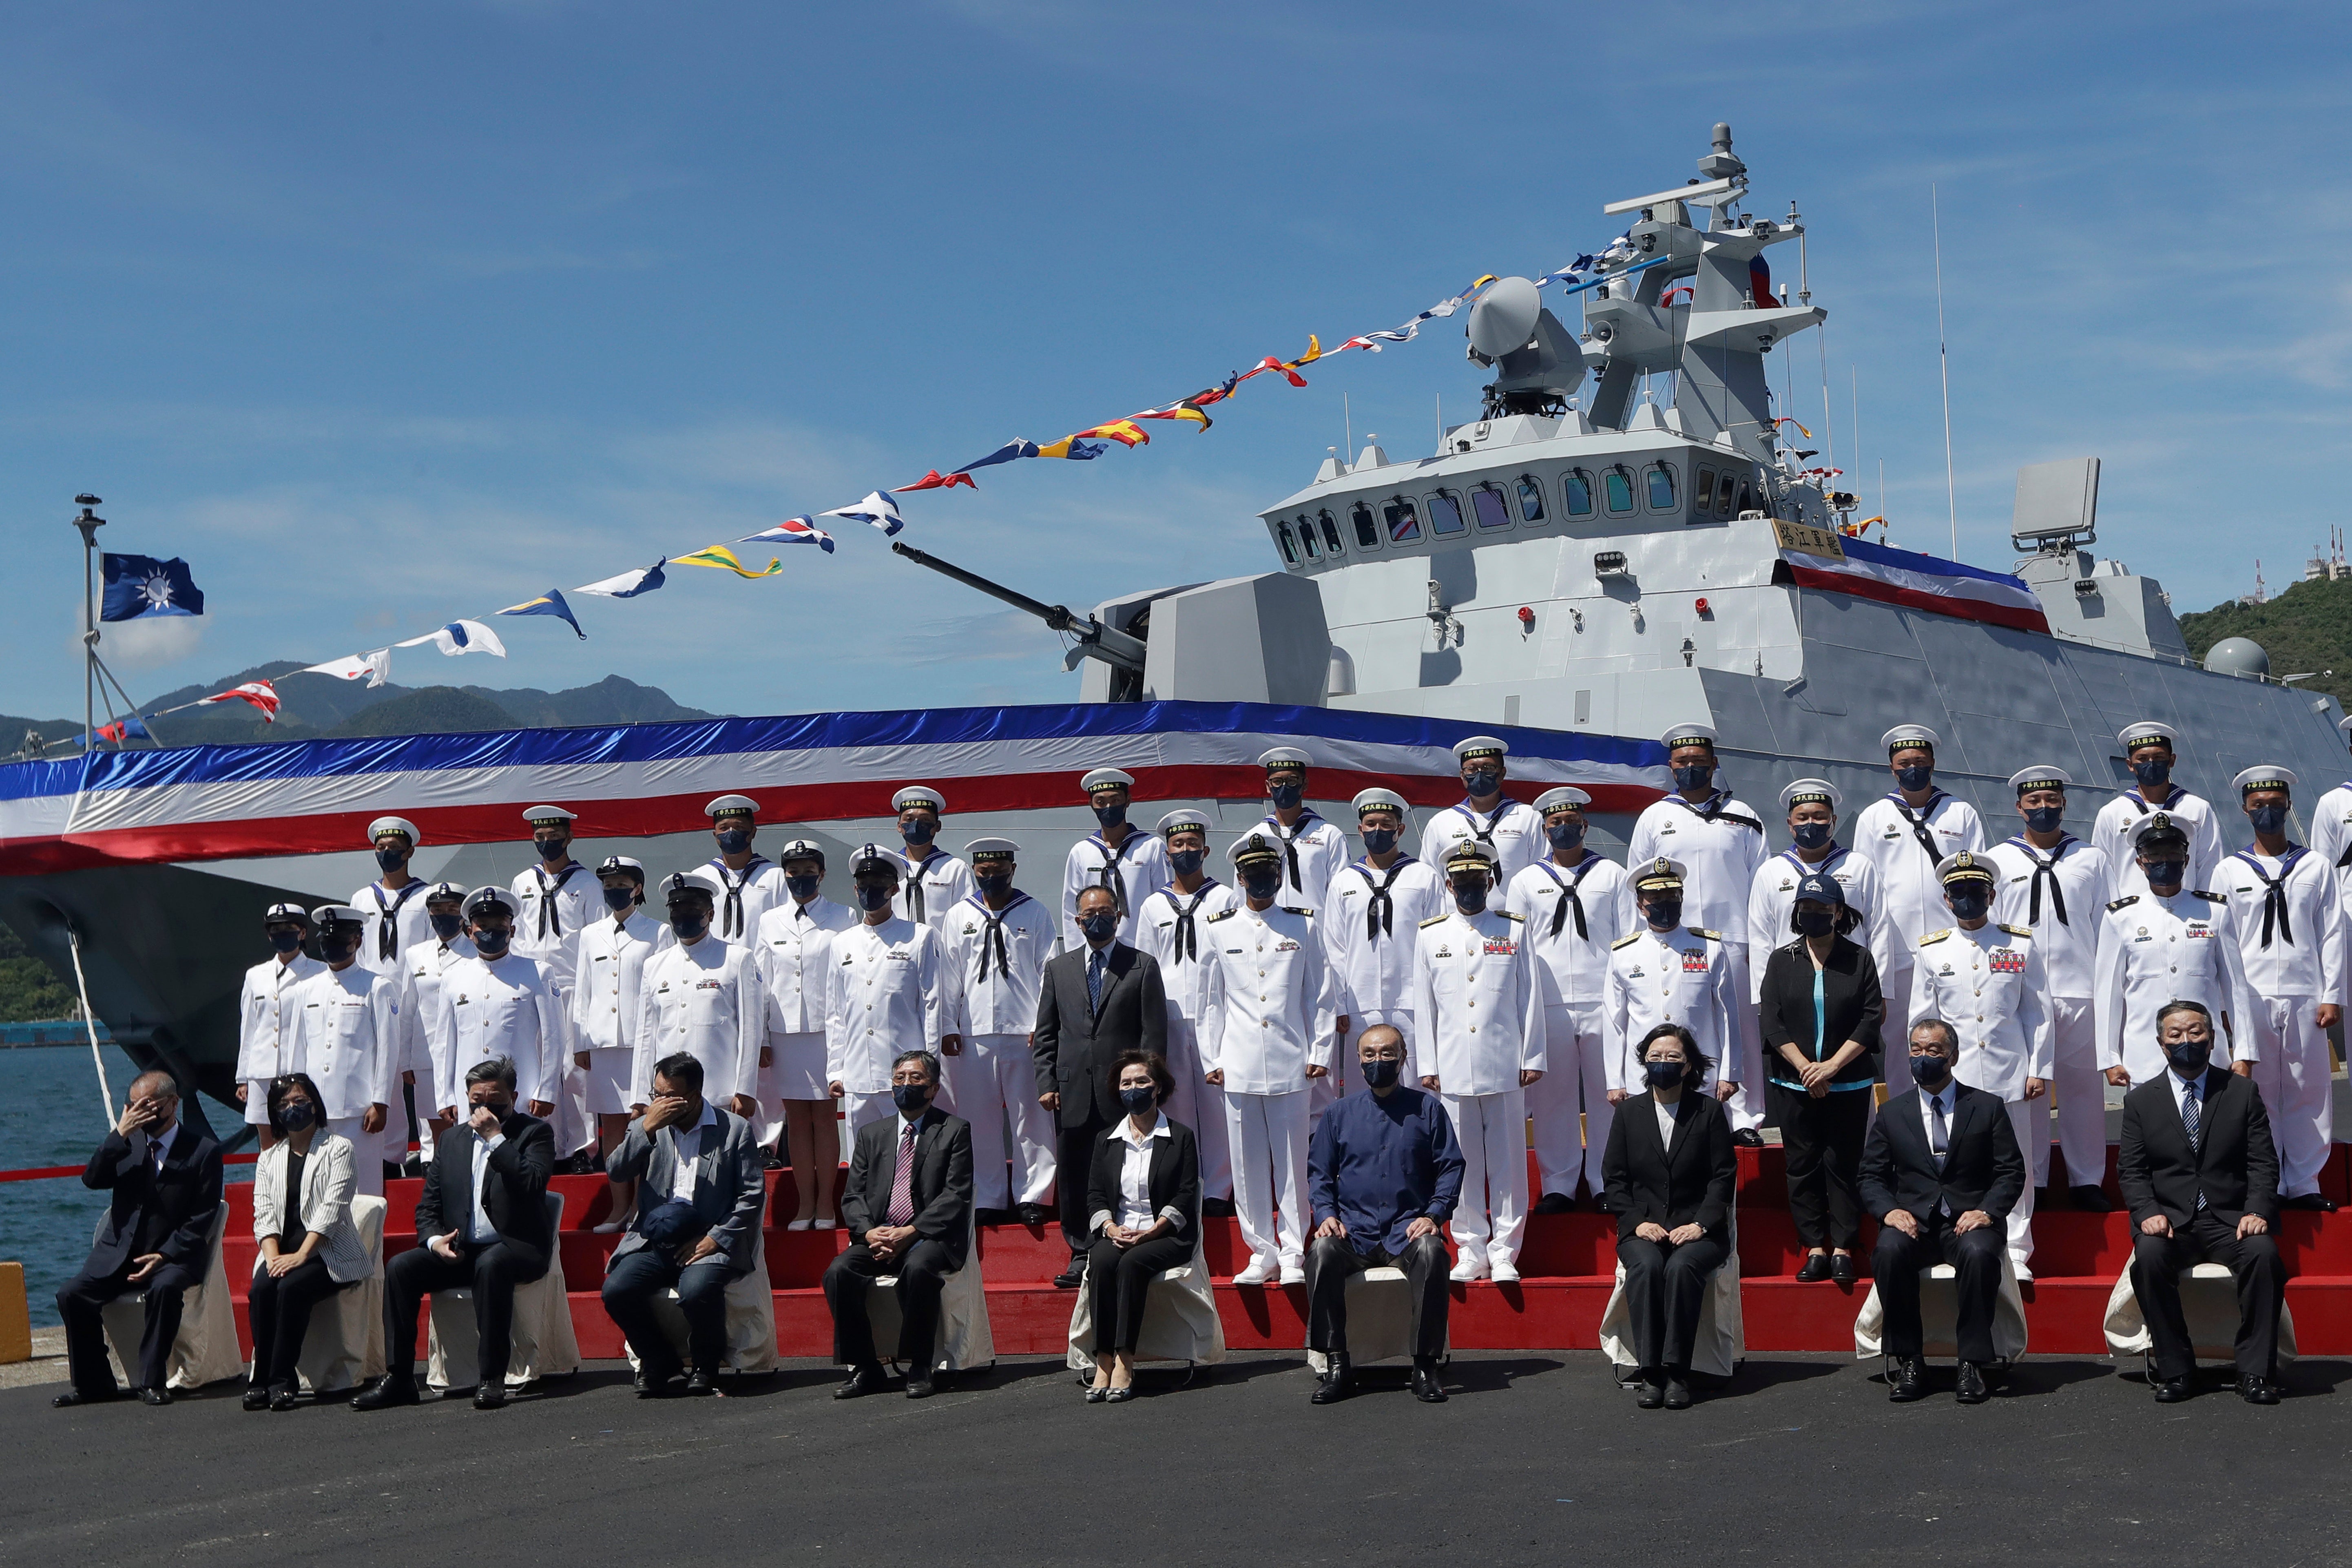 Taiwan's president oversaw the commissioning of the new domestically made navy warship Thursday as part of the island's plan to boost indigenous defense capacity amid heightened tensions with China